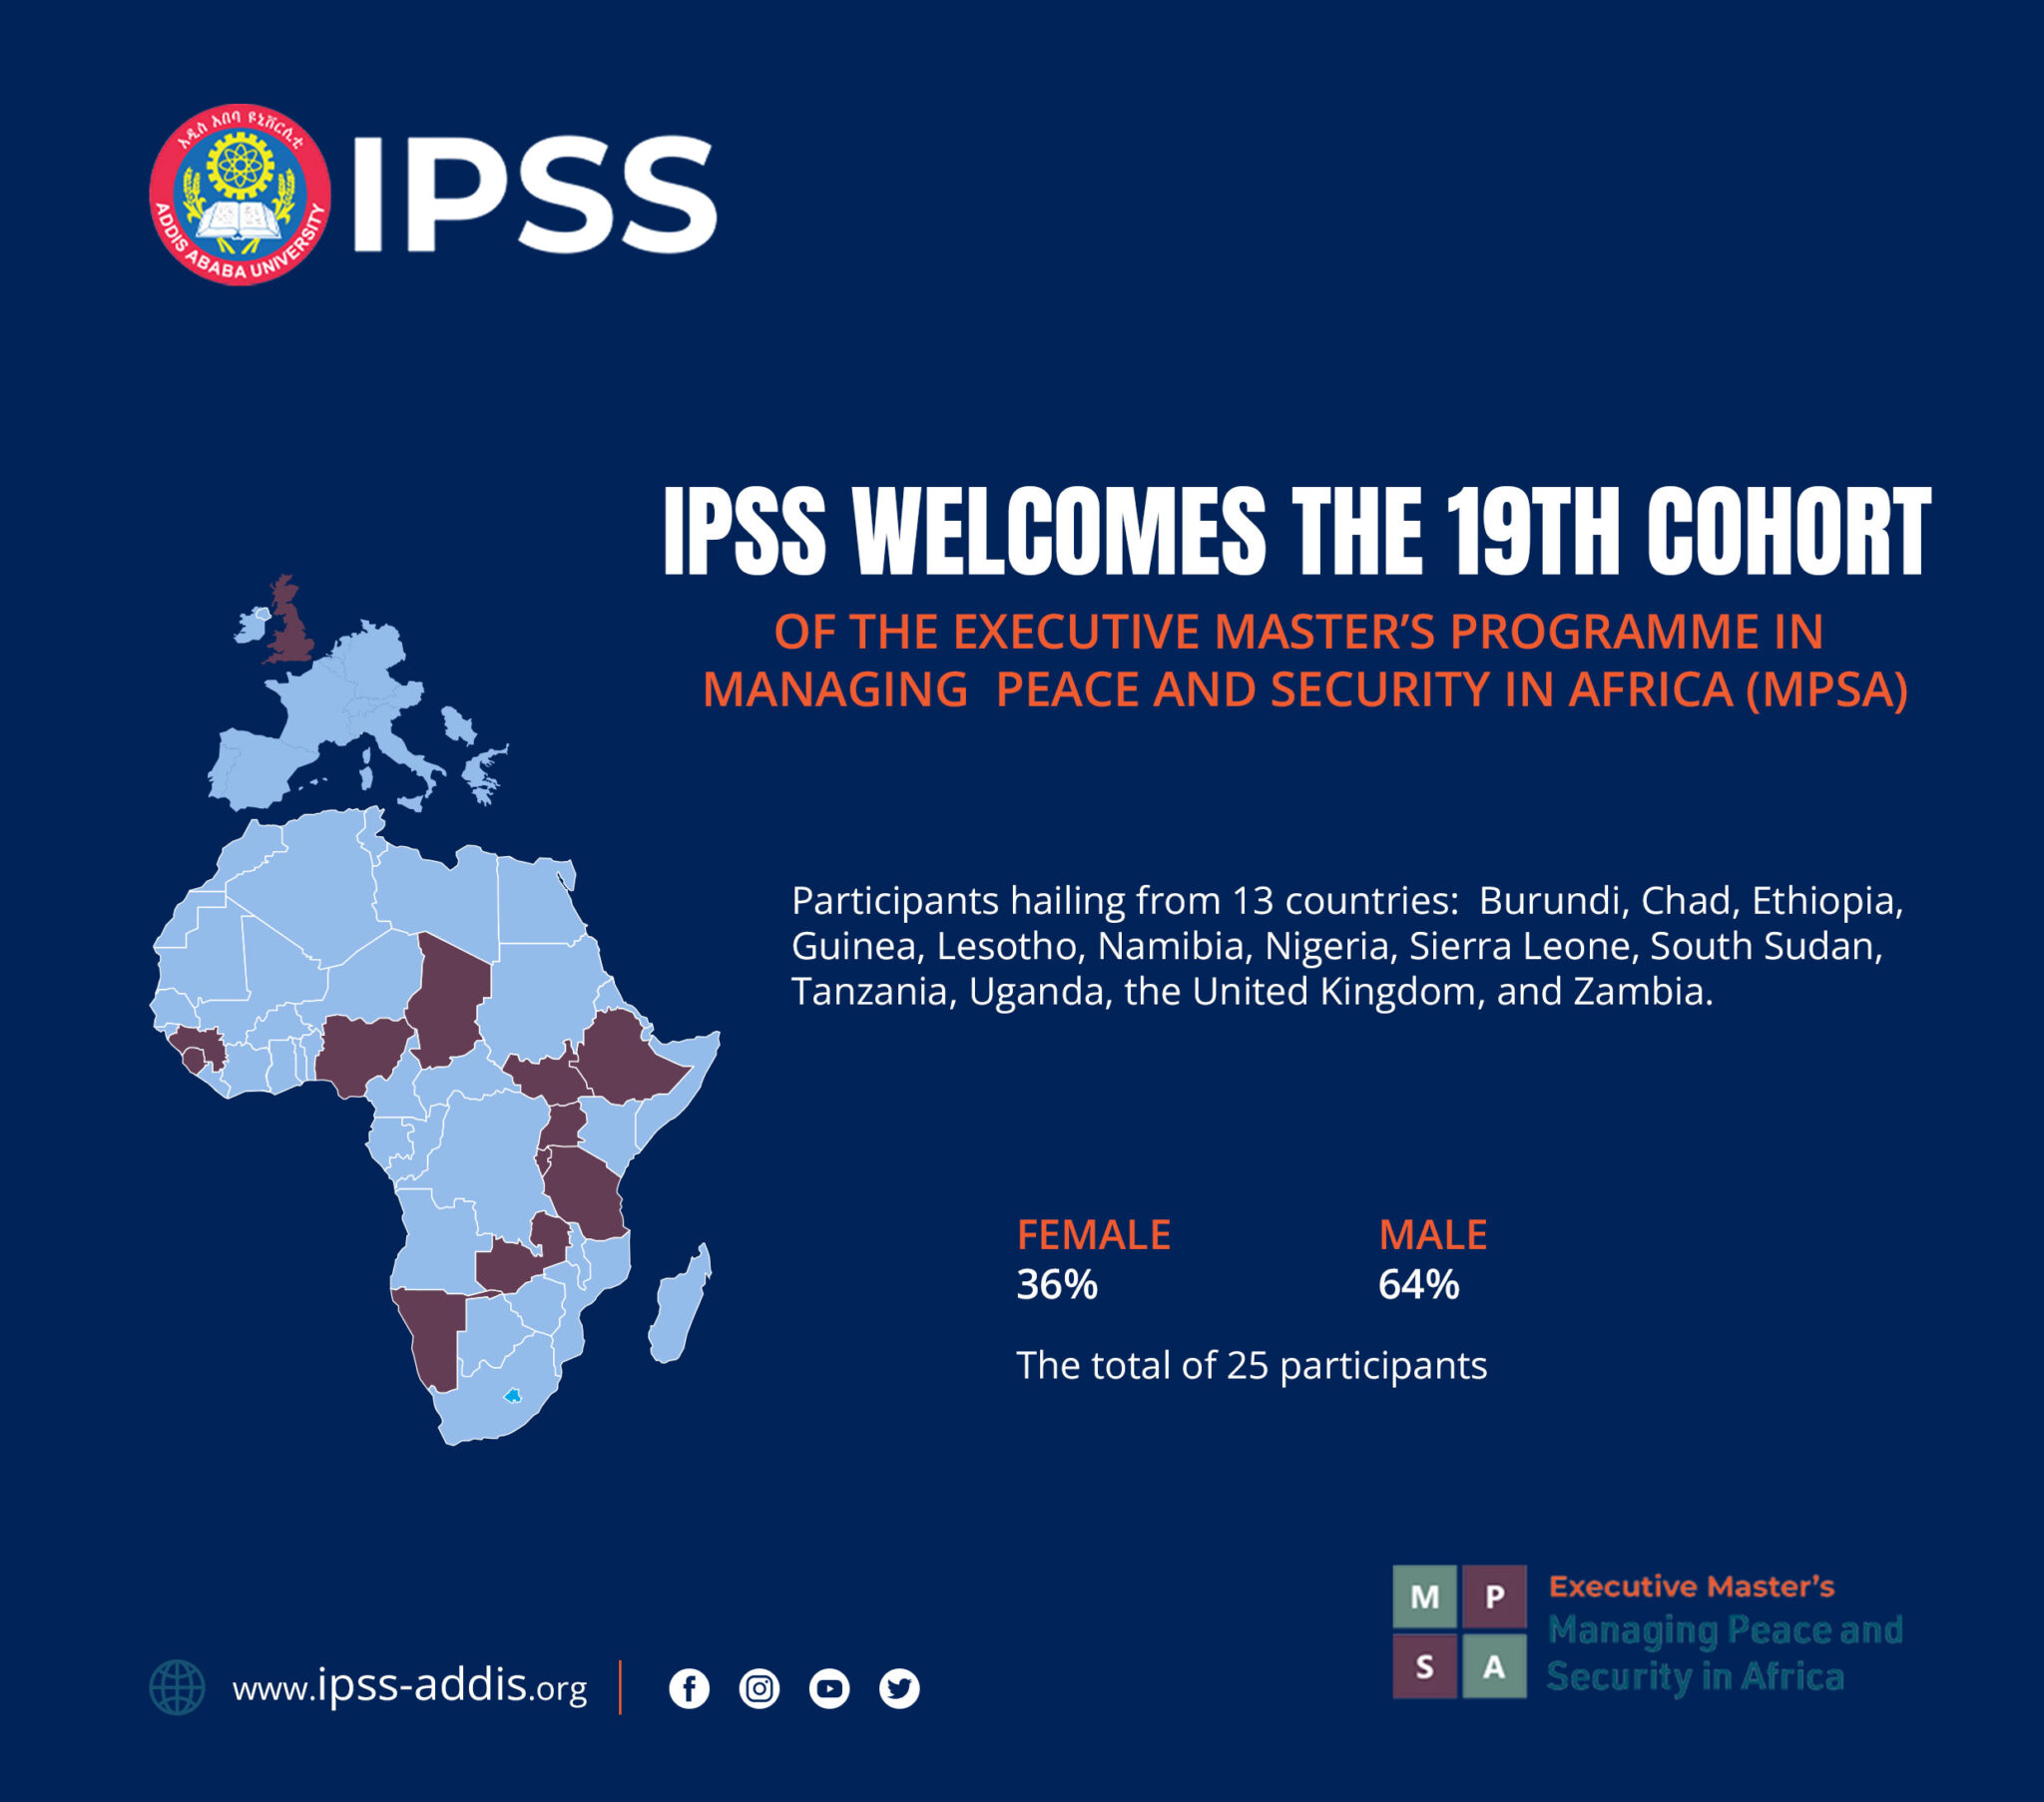 IPSS Welcomes the 19th cohort of the Executive Master’s Programme in Managing Peace and Security in Africa (MPSA)